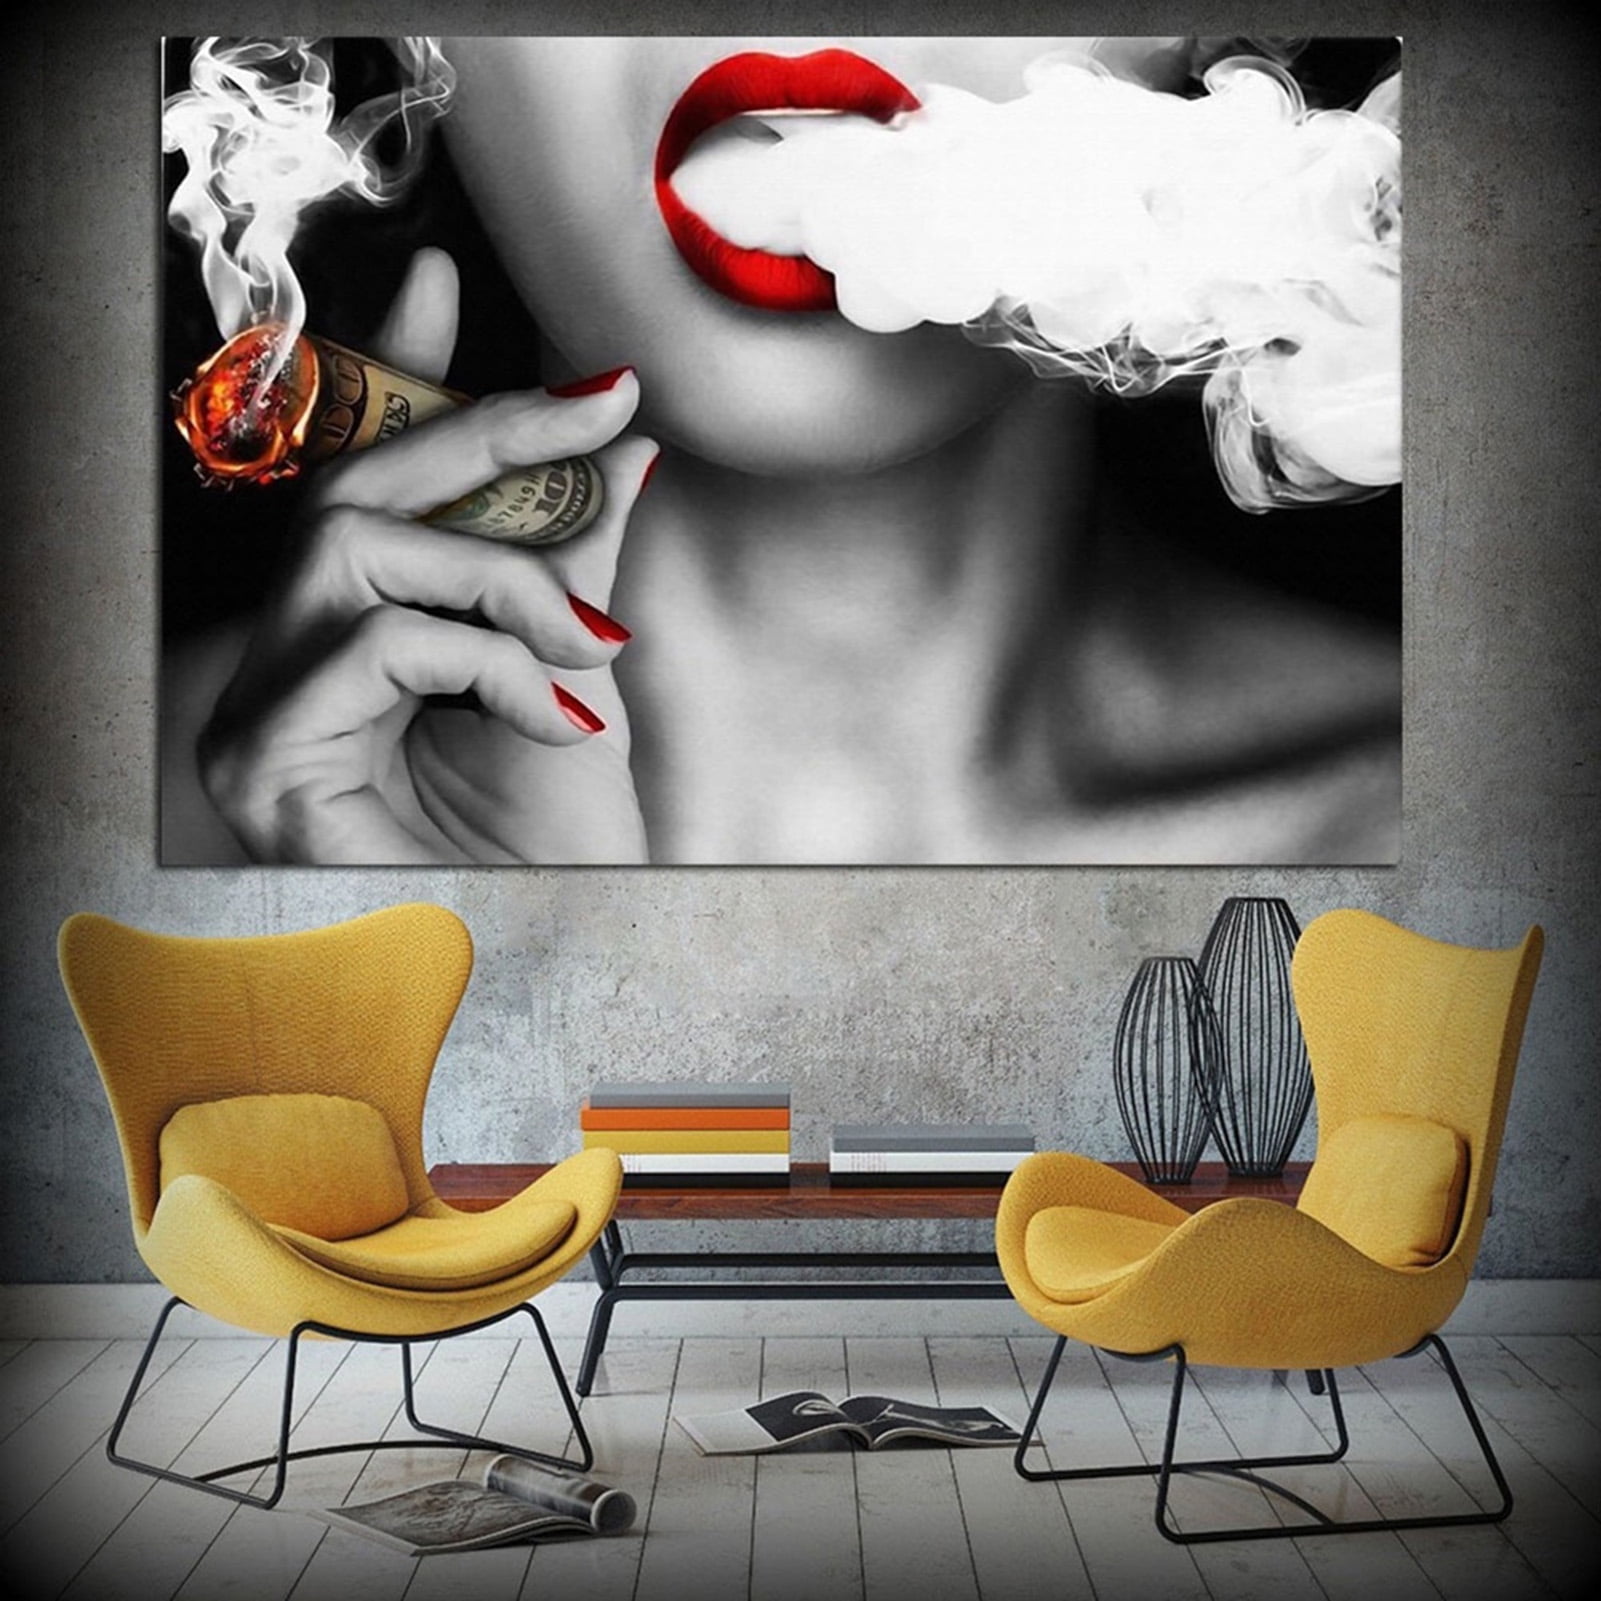 Sexy African Woman Lips Canvas Art Posters And Prints Money Graffiti Art  Wall Painting Pictures For Fashion Home Decorative – Nordic Wall Decor